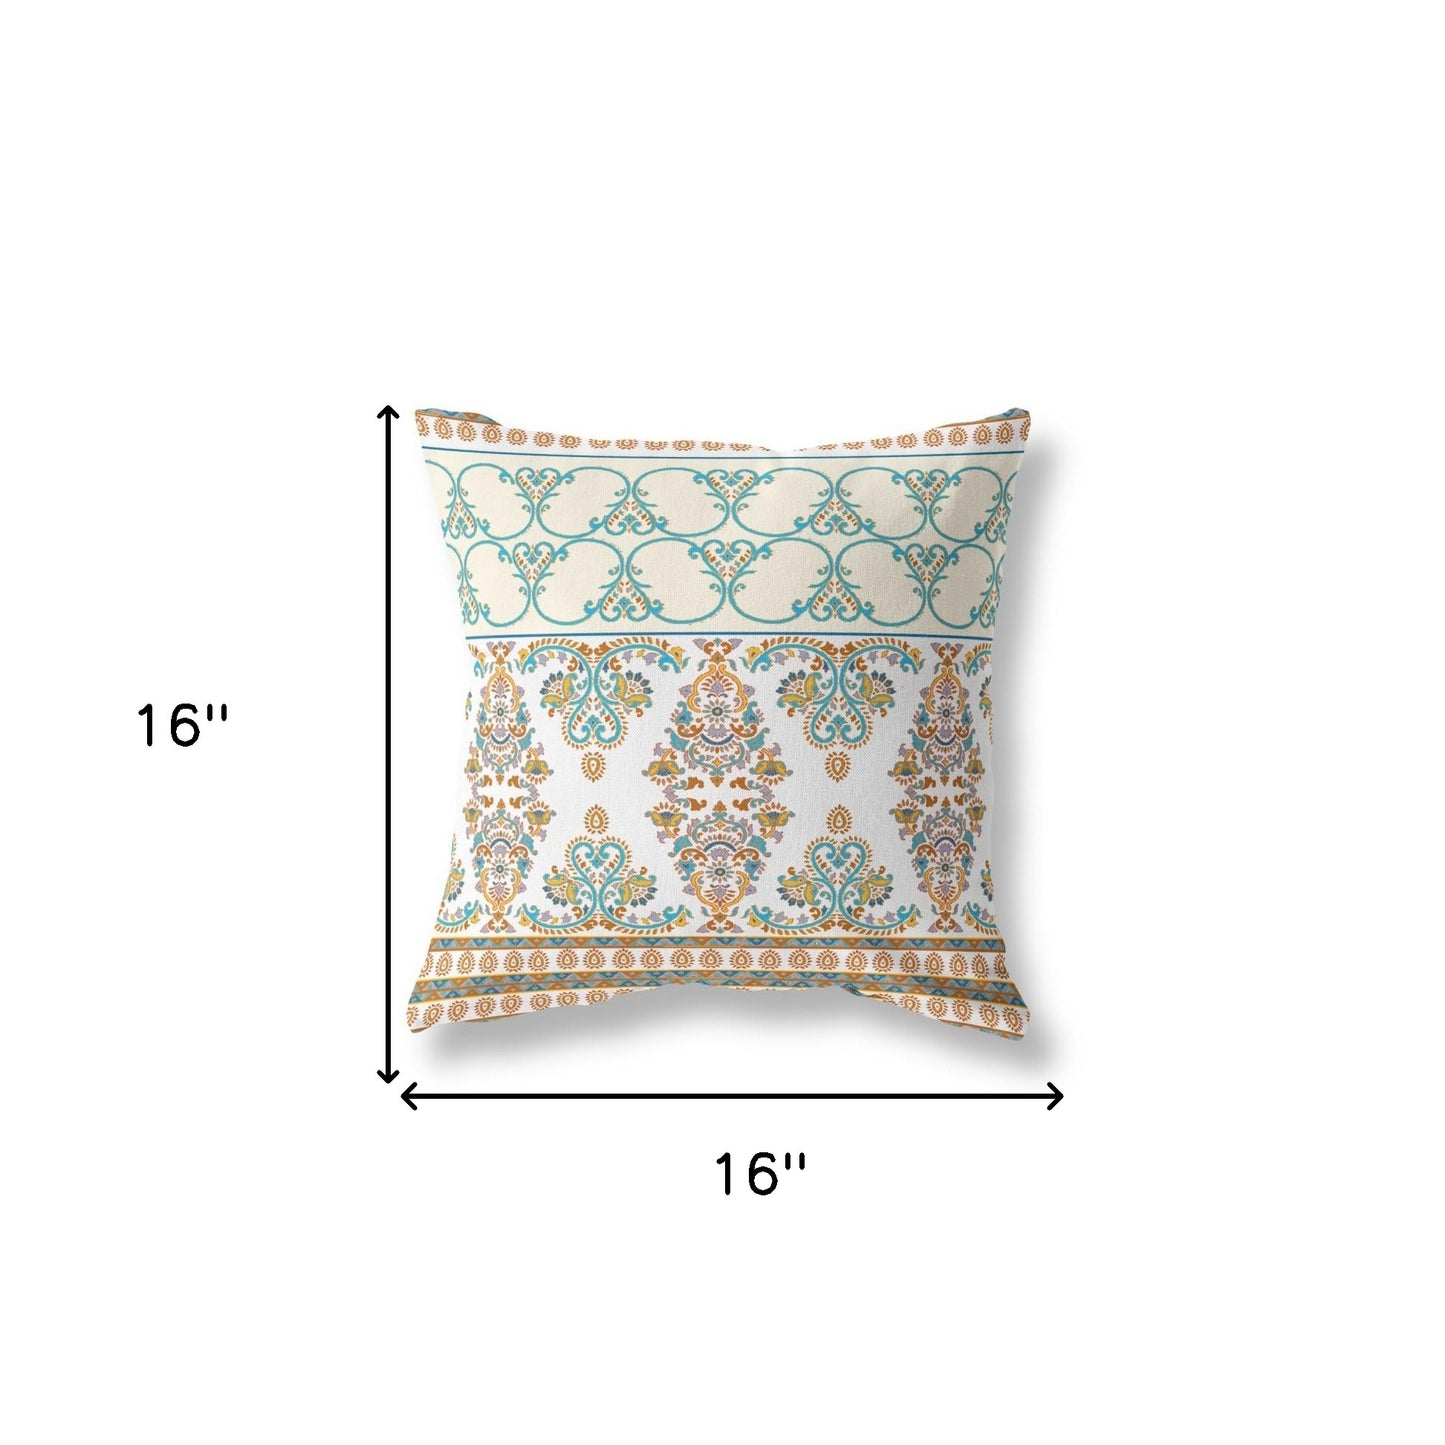 16" X 16" White And Blue Zippered Damask Indoor Outdoor Throw Pillow